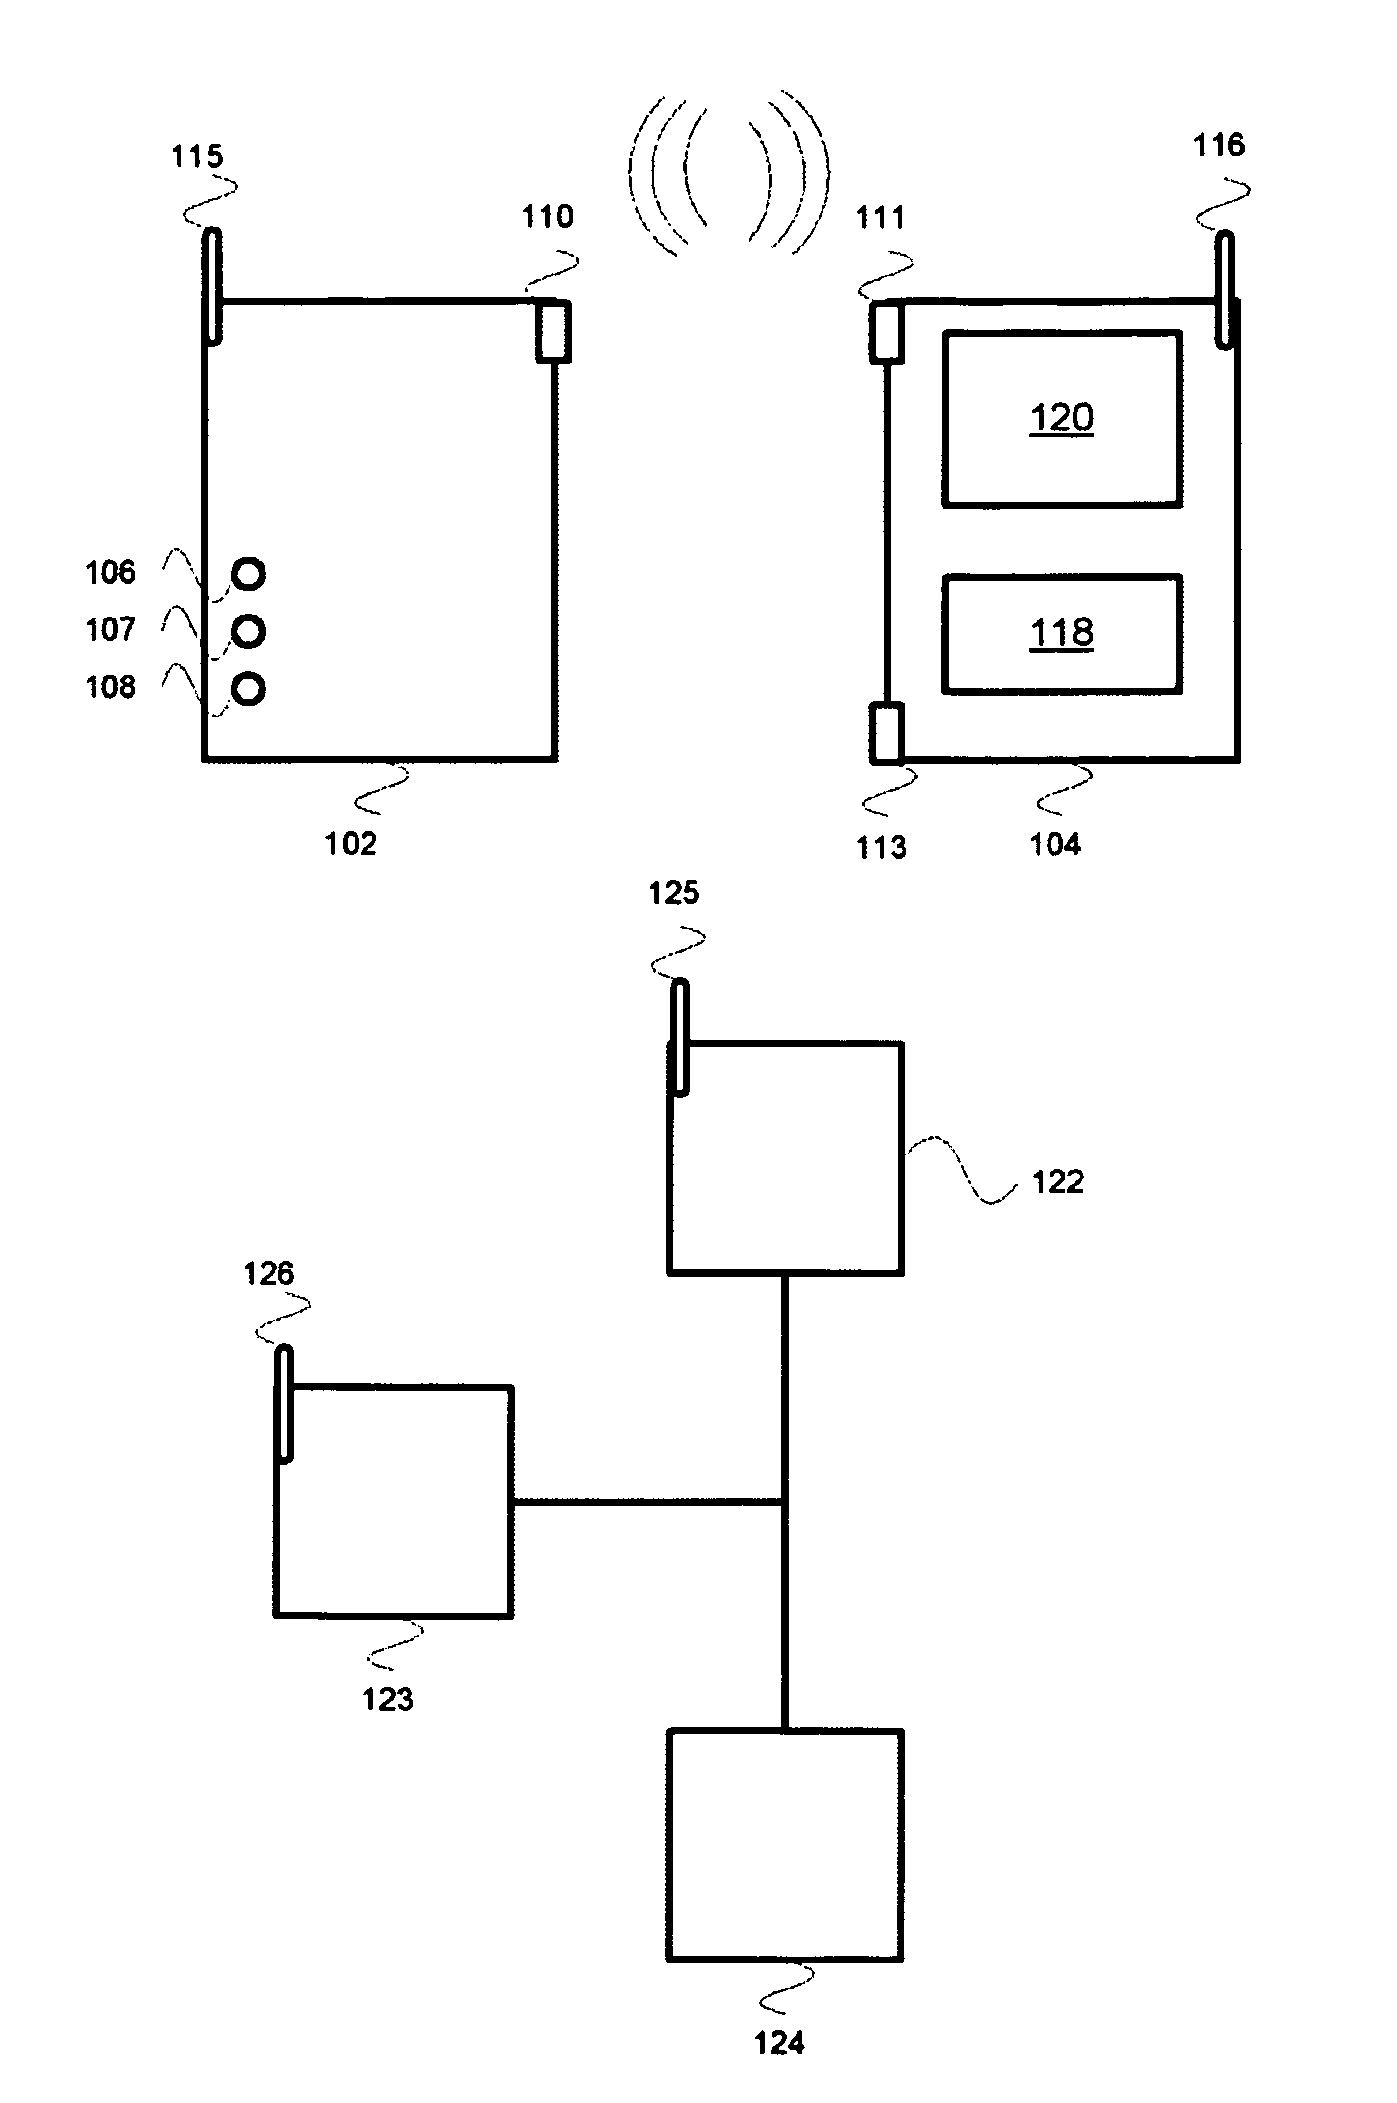 Device pairing via device to device contact